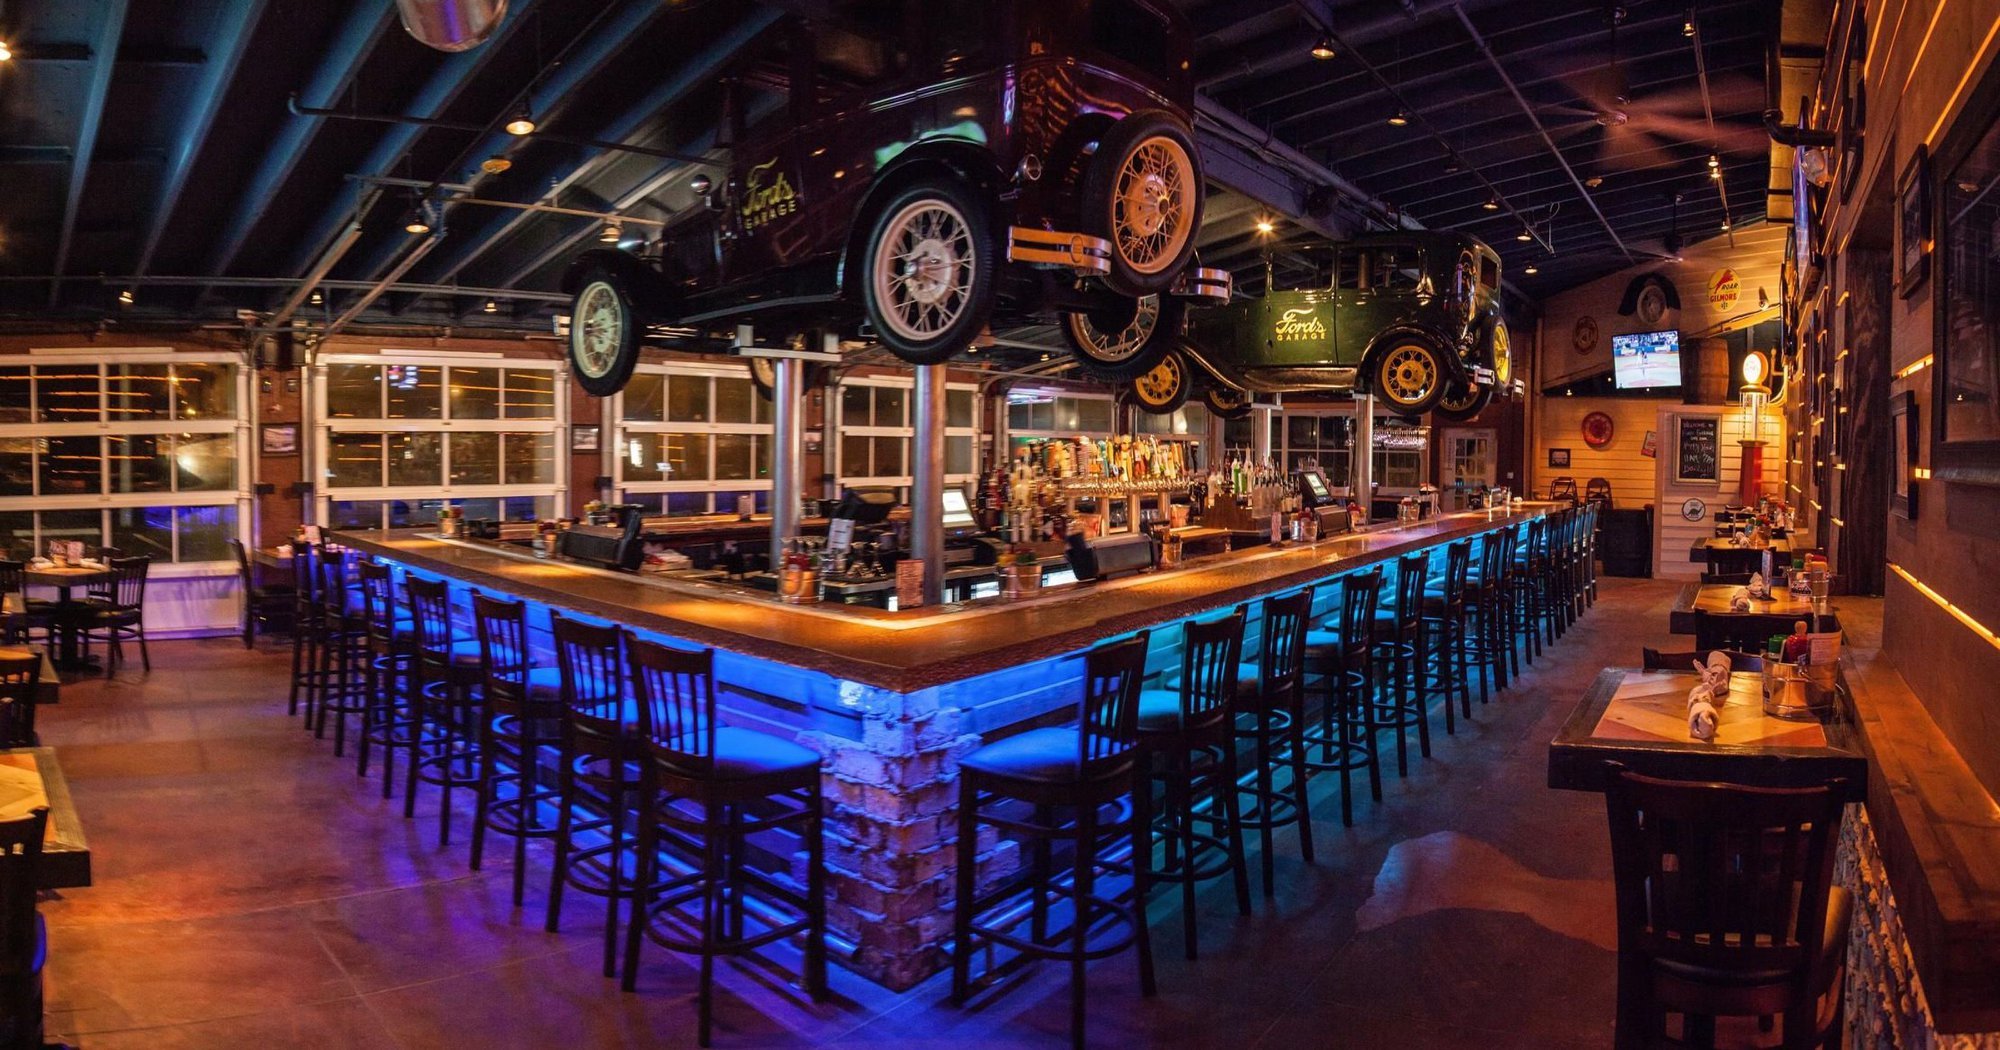 The bar area at Ford's Garage features 